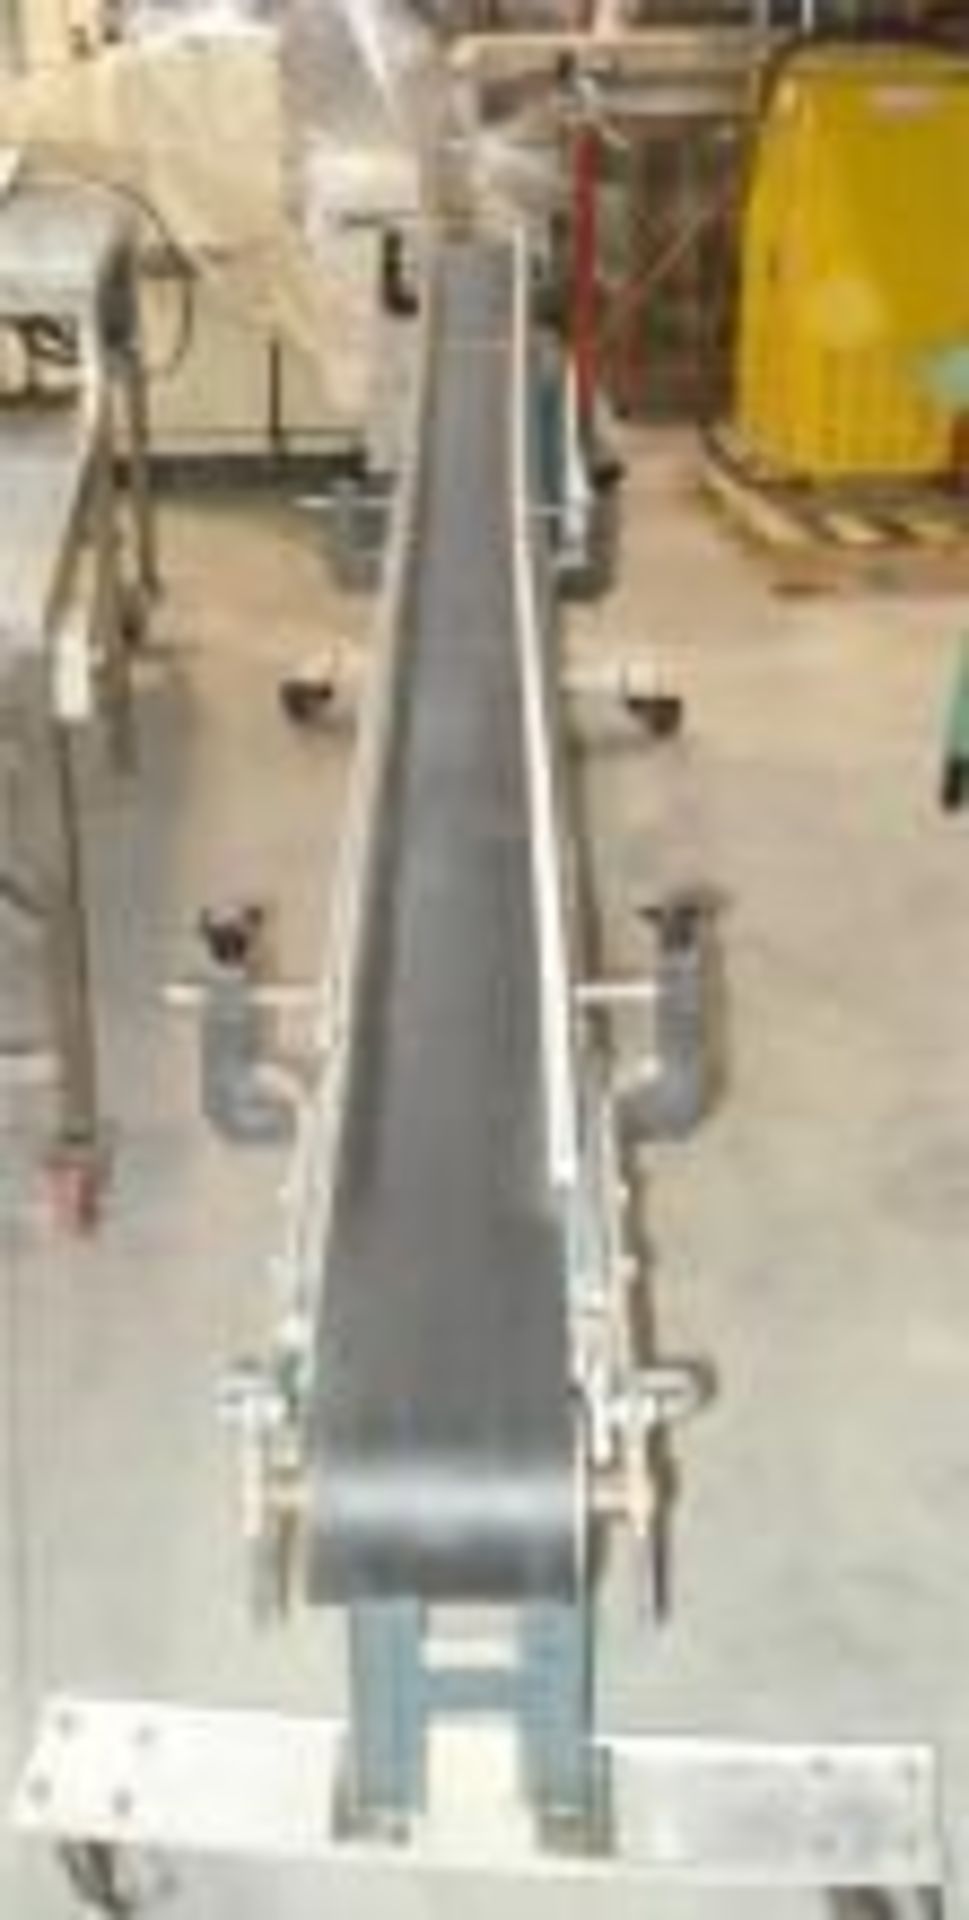 Used Rapistan Conveyor with Variable Speed Drive. Measures 11 foot long x 5 ½ inches with Rubberized